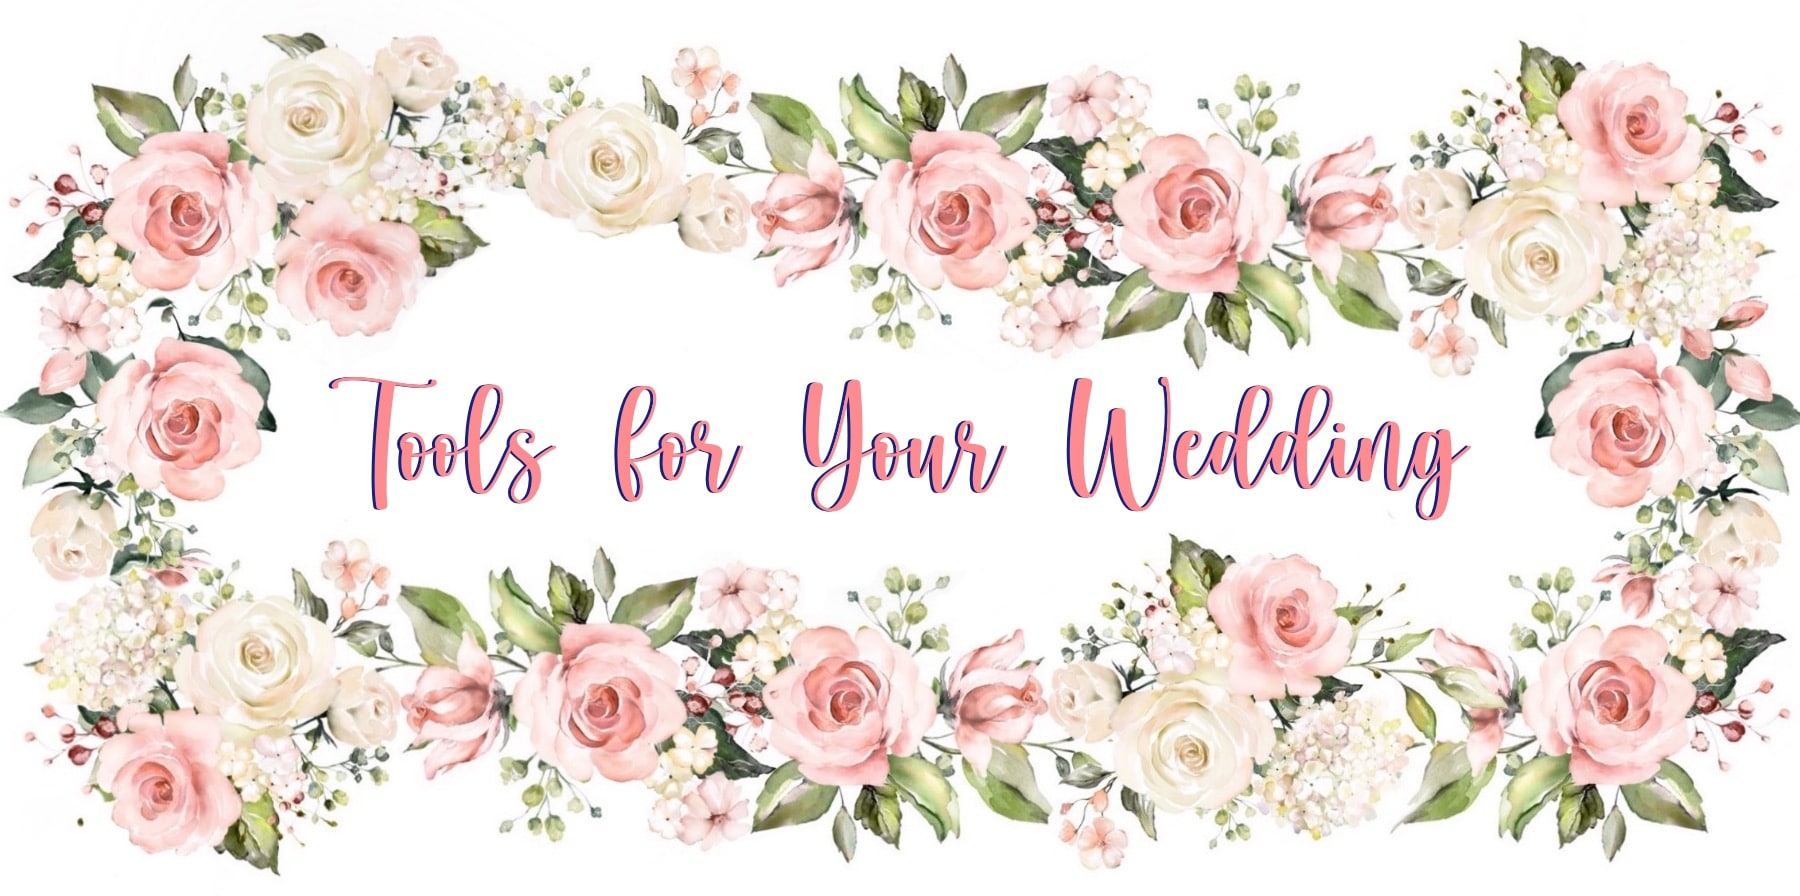 Wedding Survival Guide Tools for Your Wedding